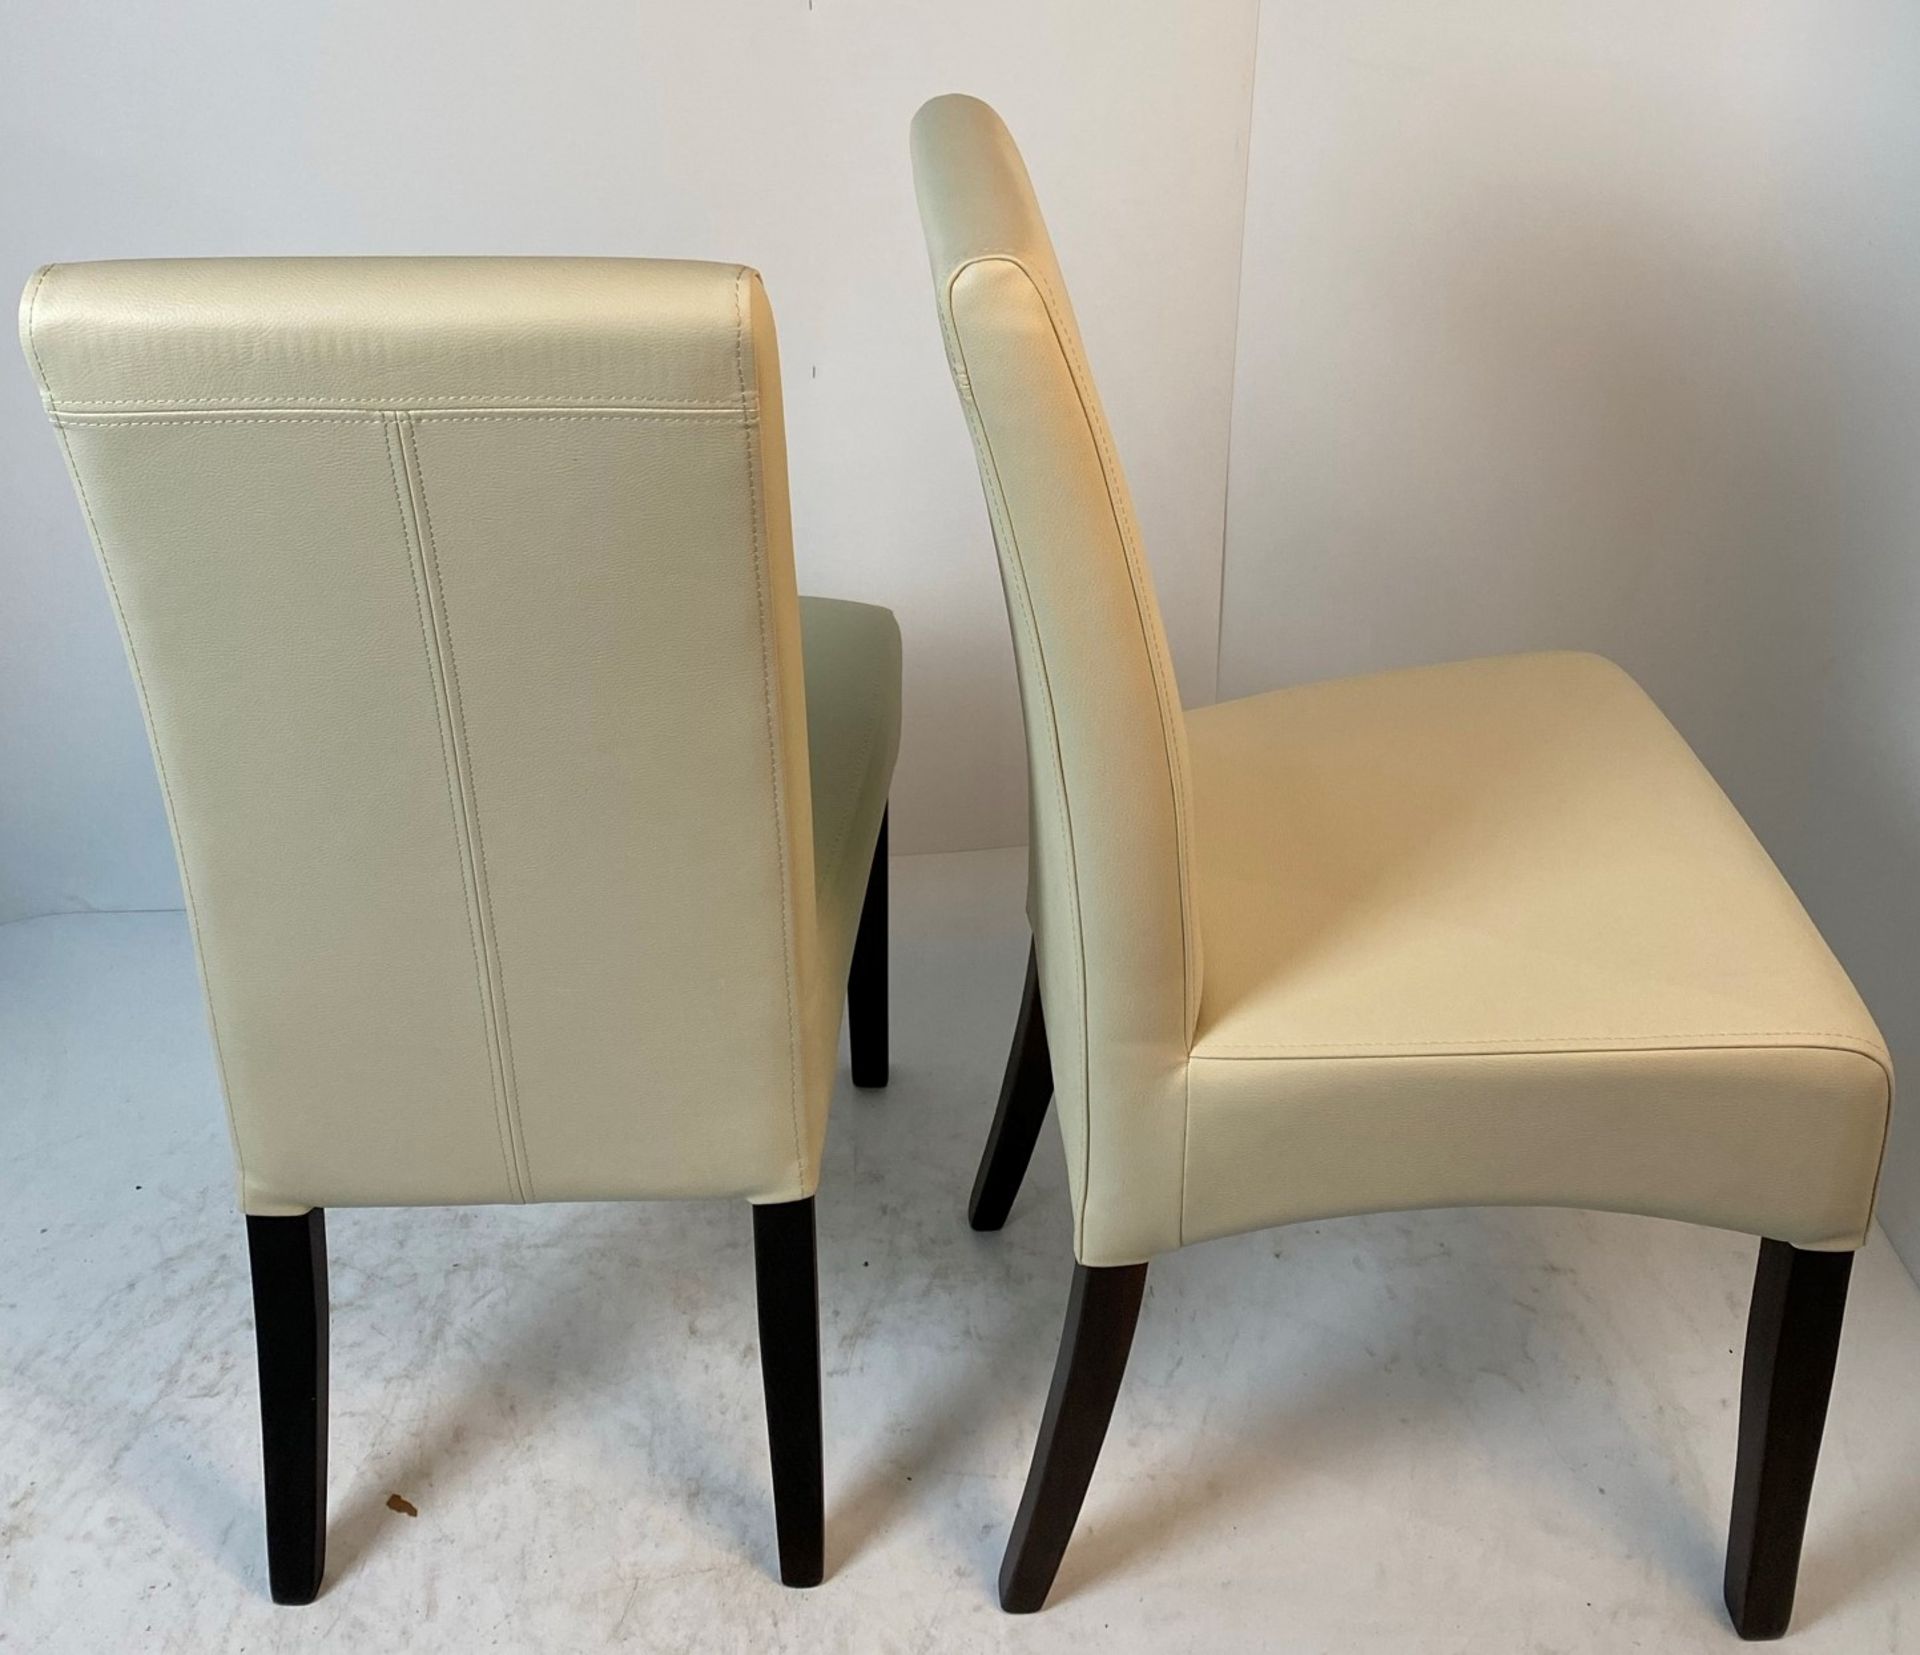 2 x Valencia Vena Ivory side/dining chairs with walnut coloured frames - Image 2 of 3